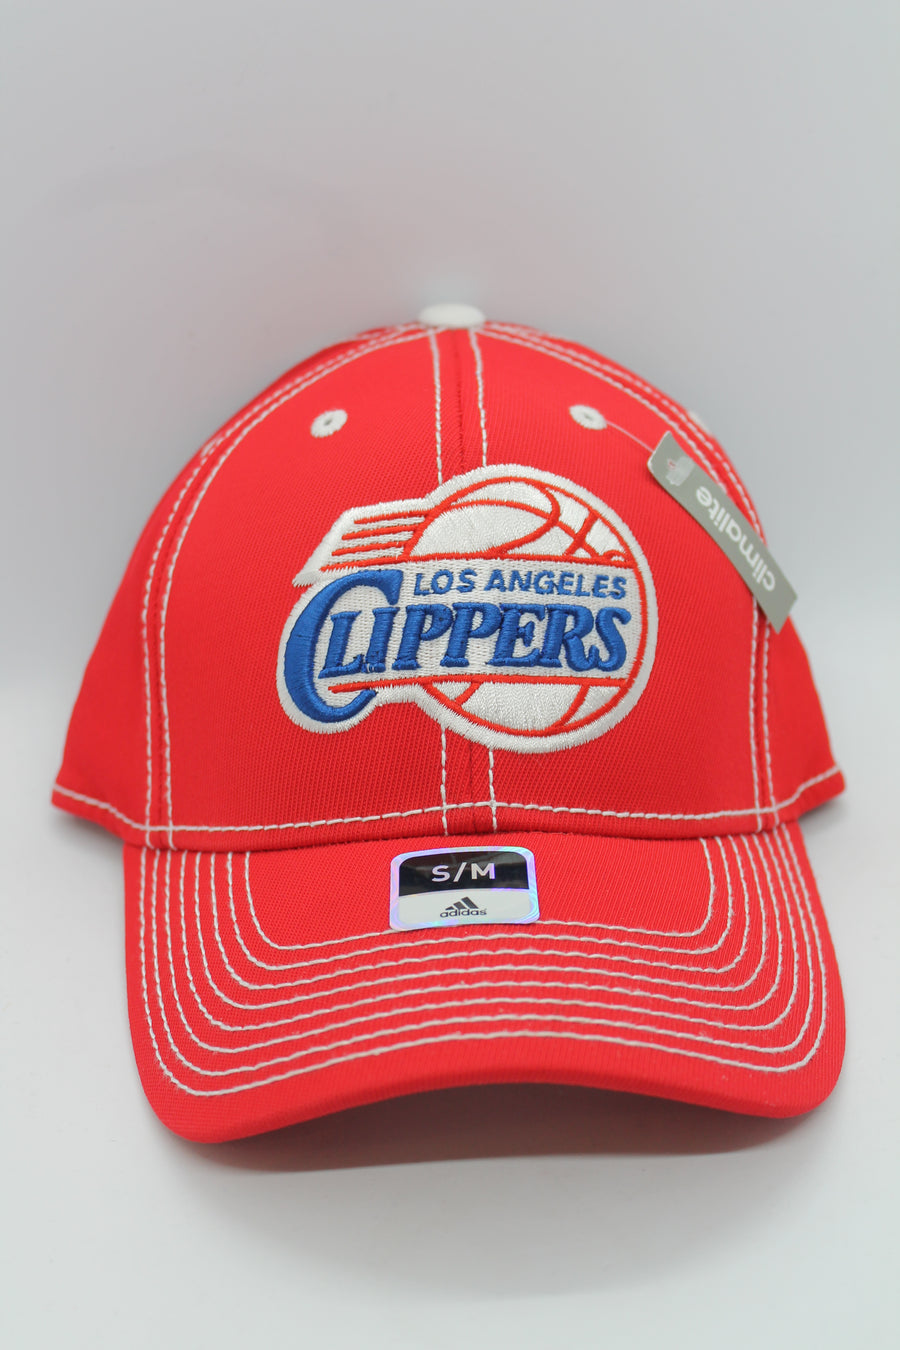 NBA Los Angeles Clippers Adidas Hat